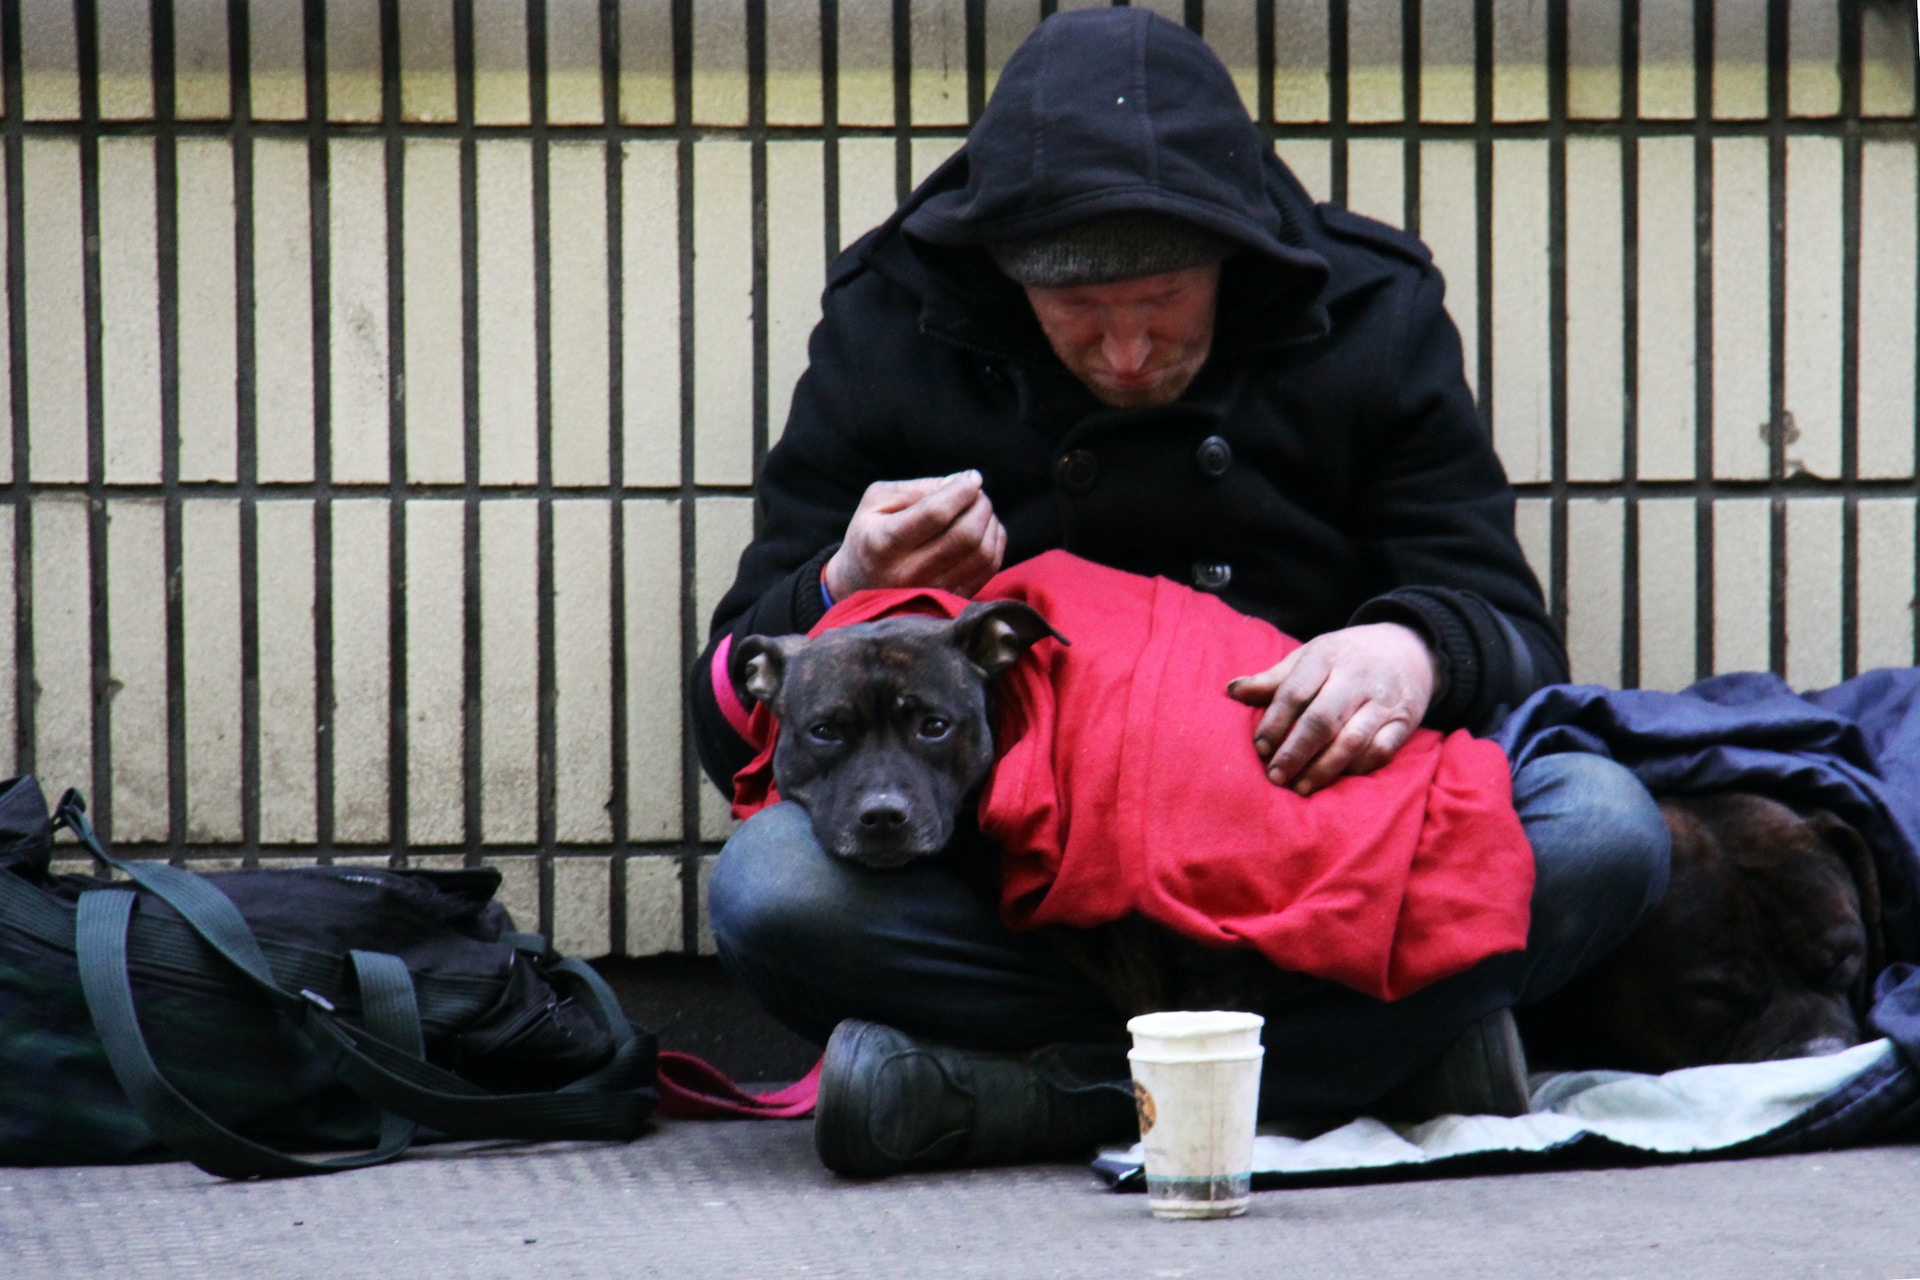 A homeless man with their dog